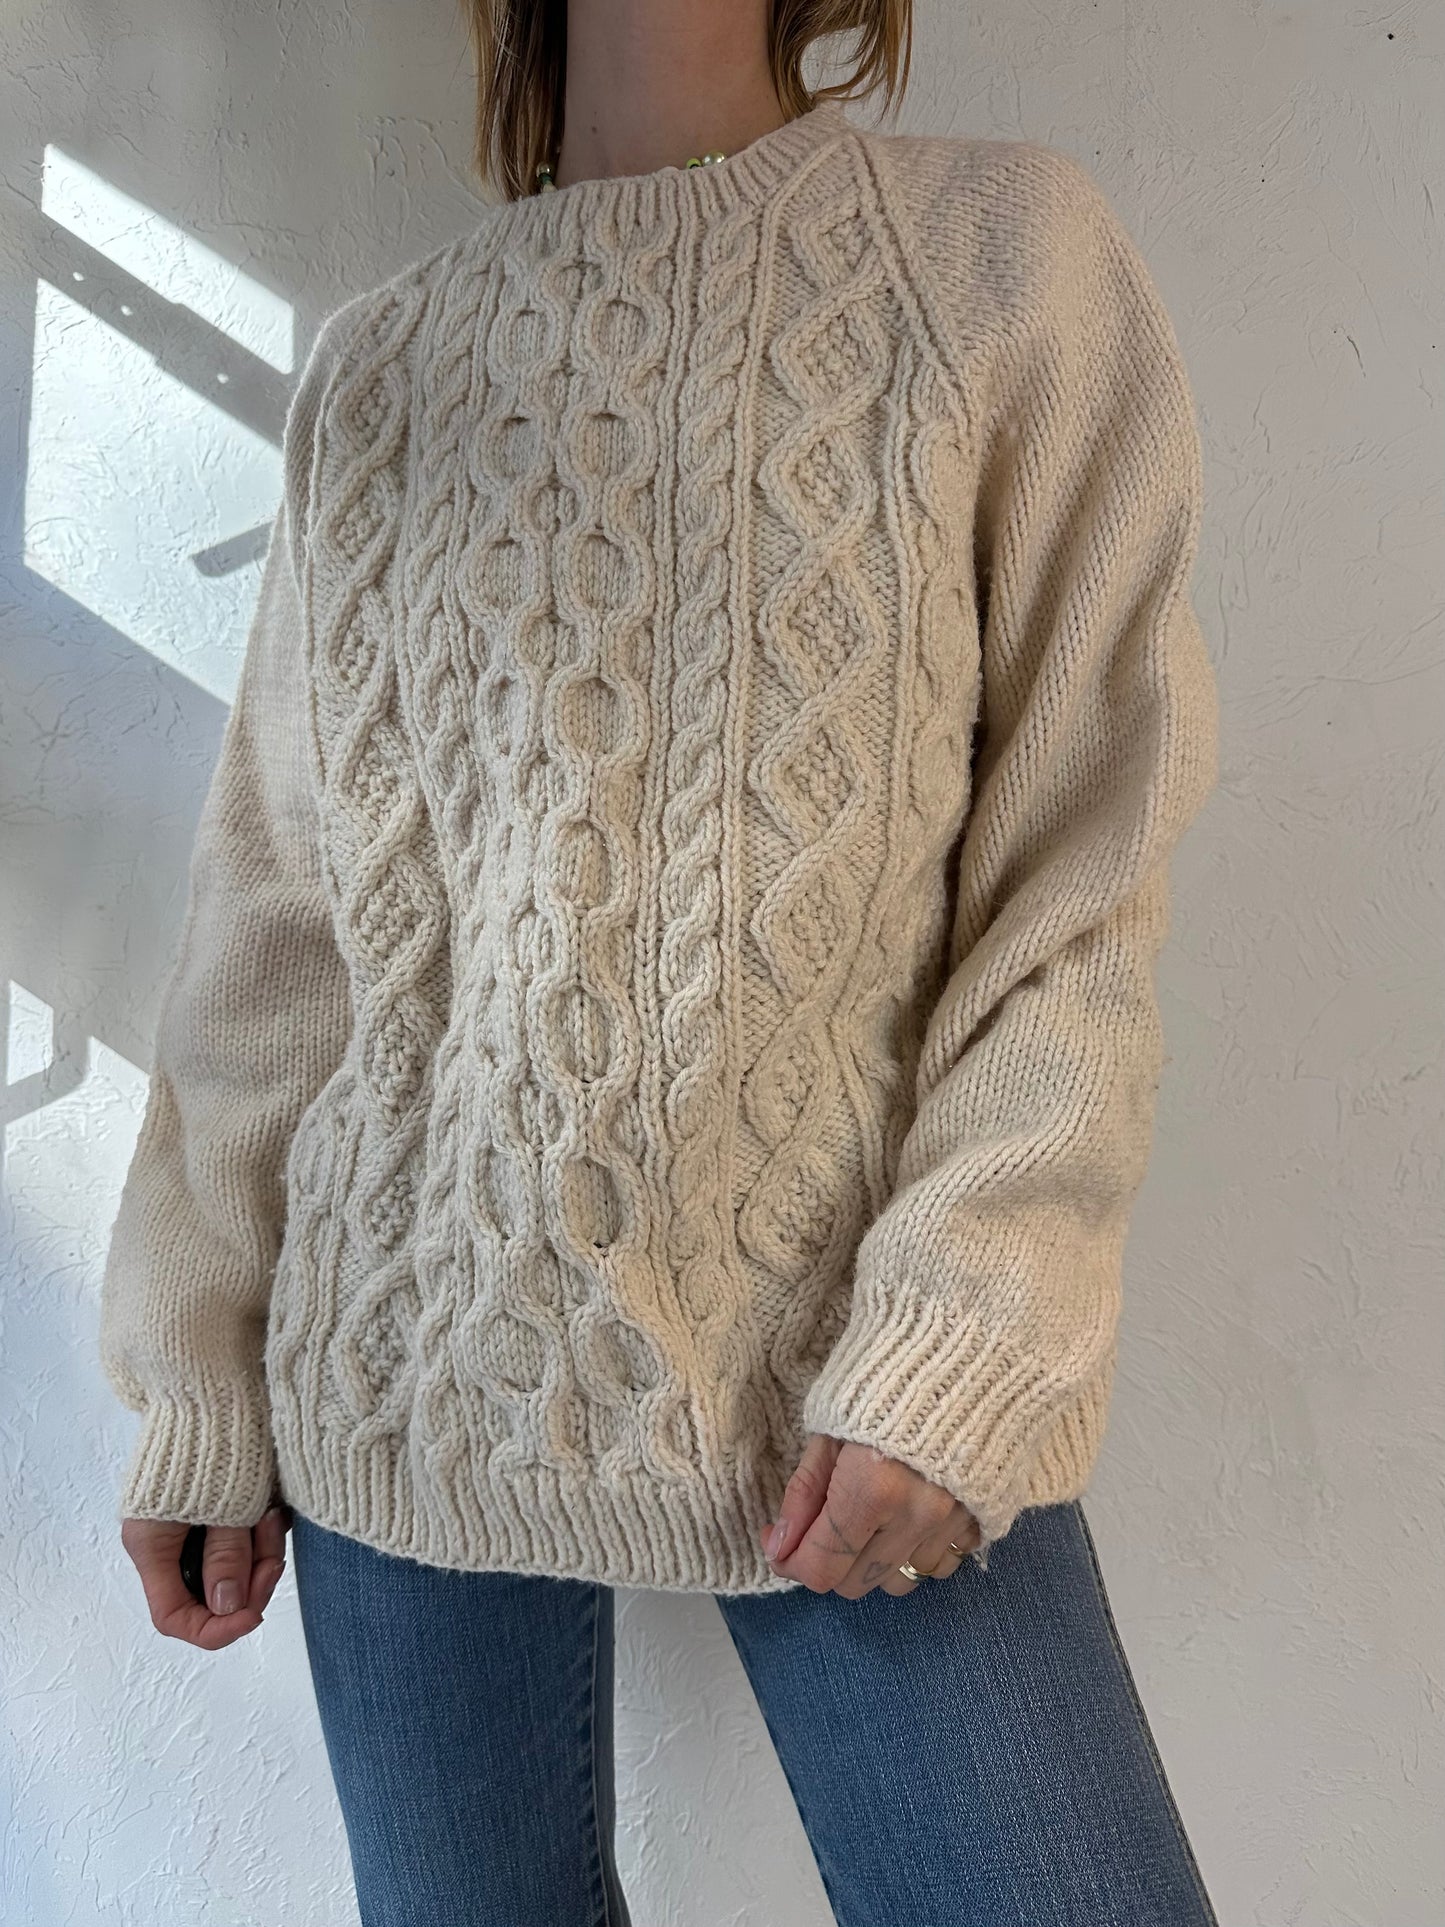 Vintage Cream Cable Knit Fishermans Sweater / Large